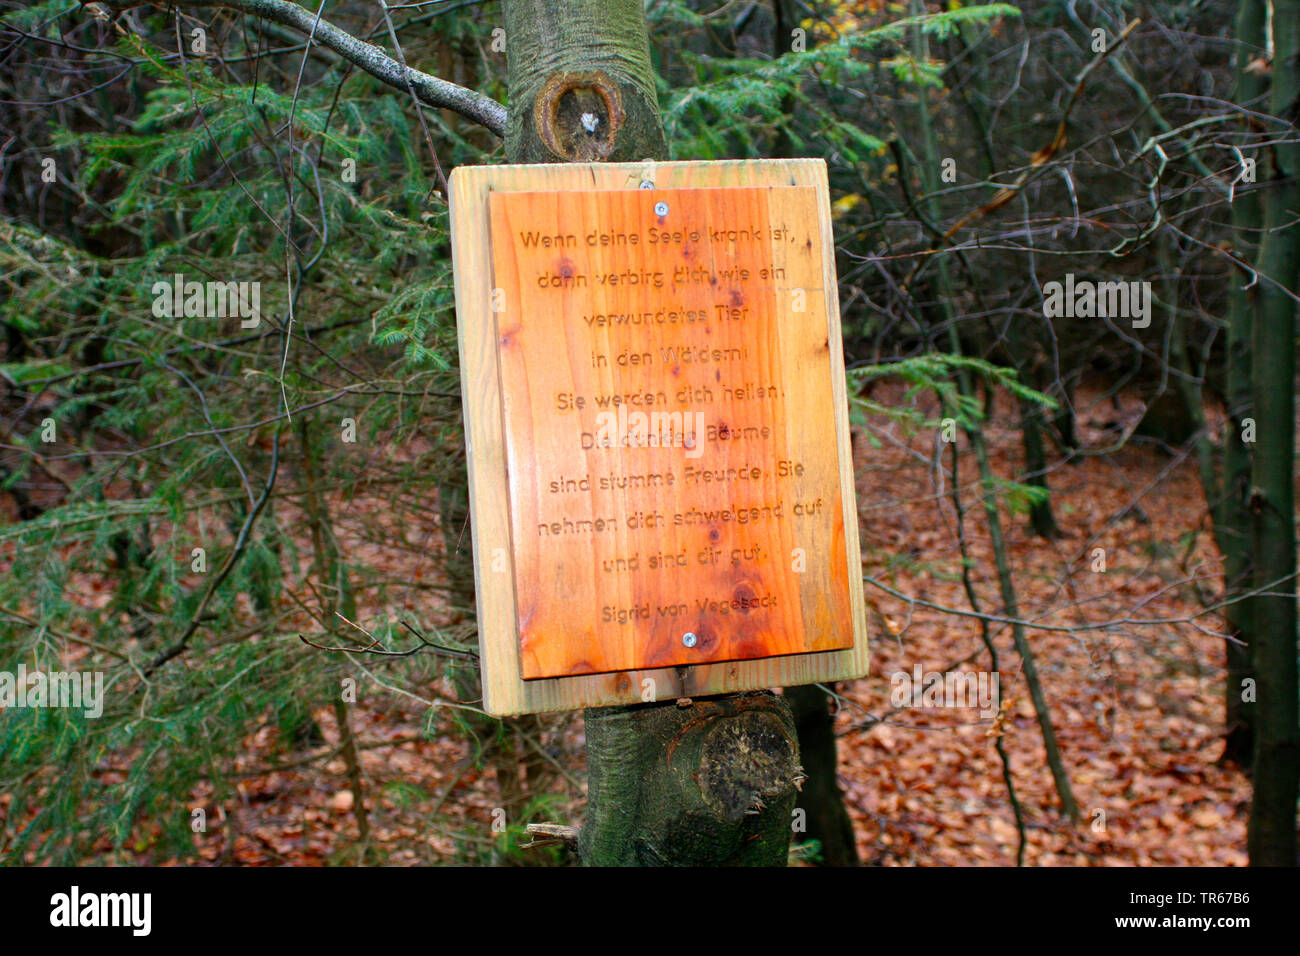 sign with text about the sence of a wood, Germany Stock Photo